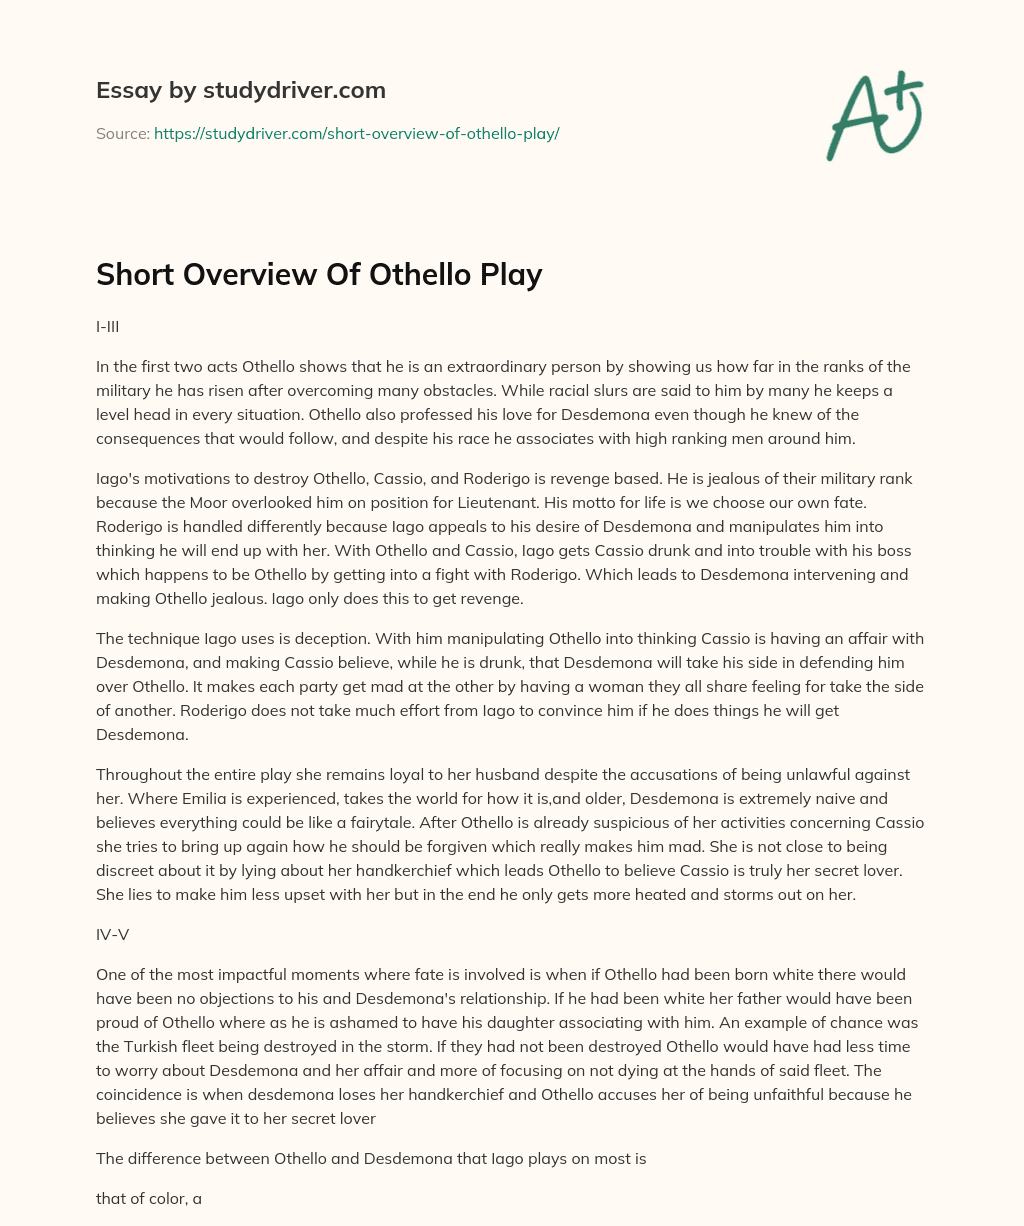 Short Overview of Othello Play essay